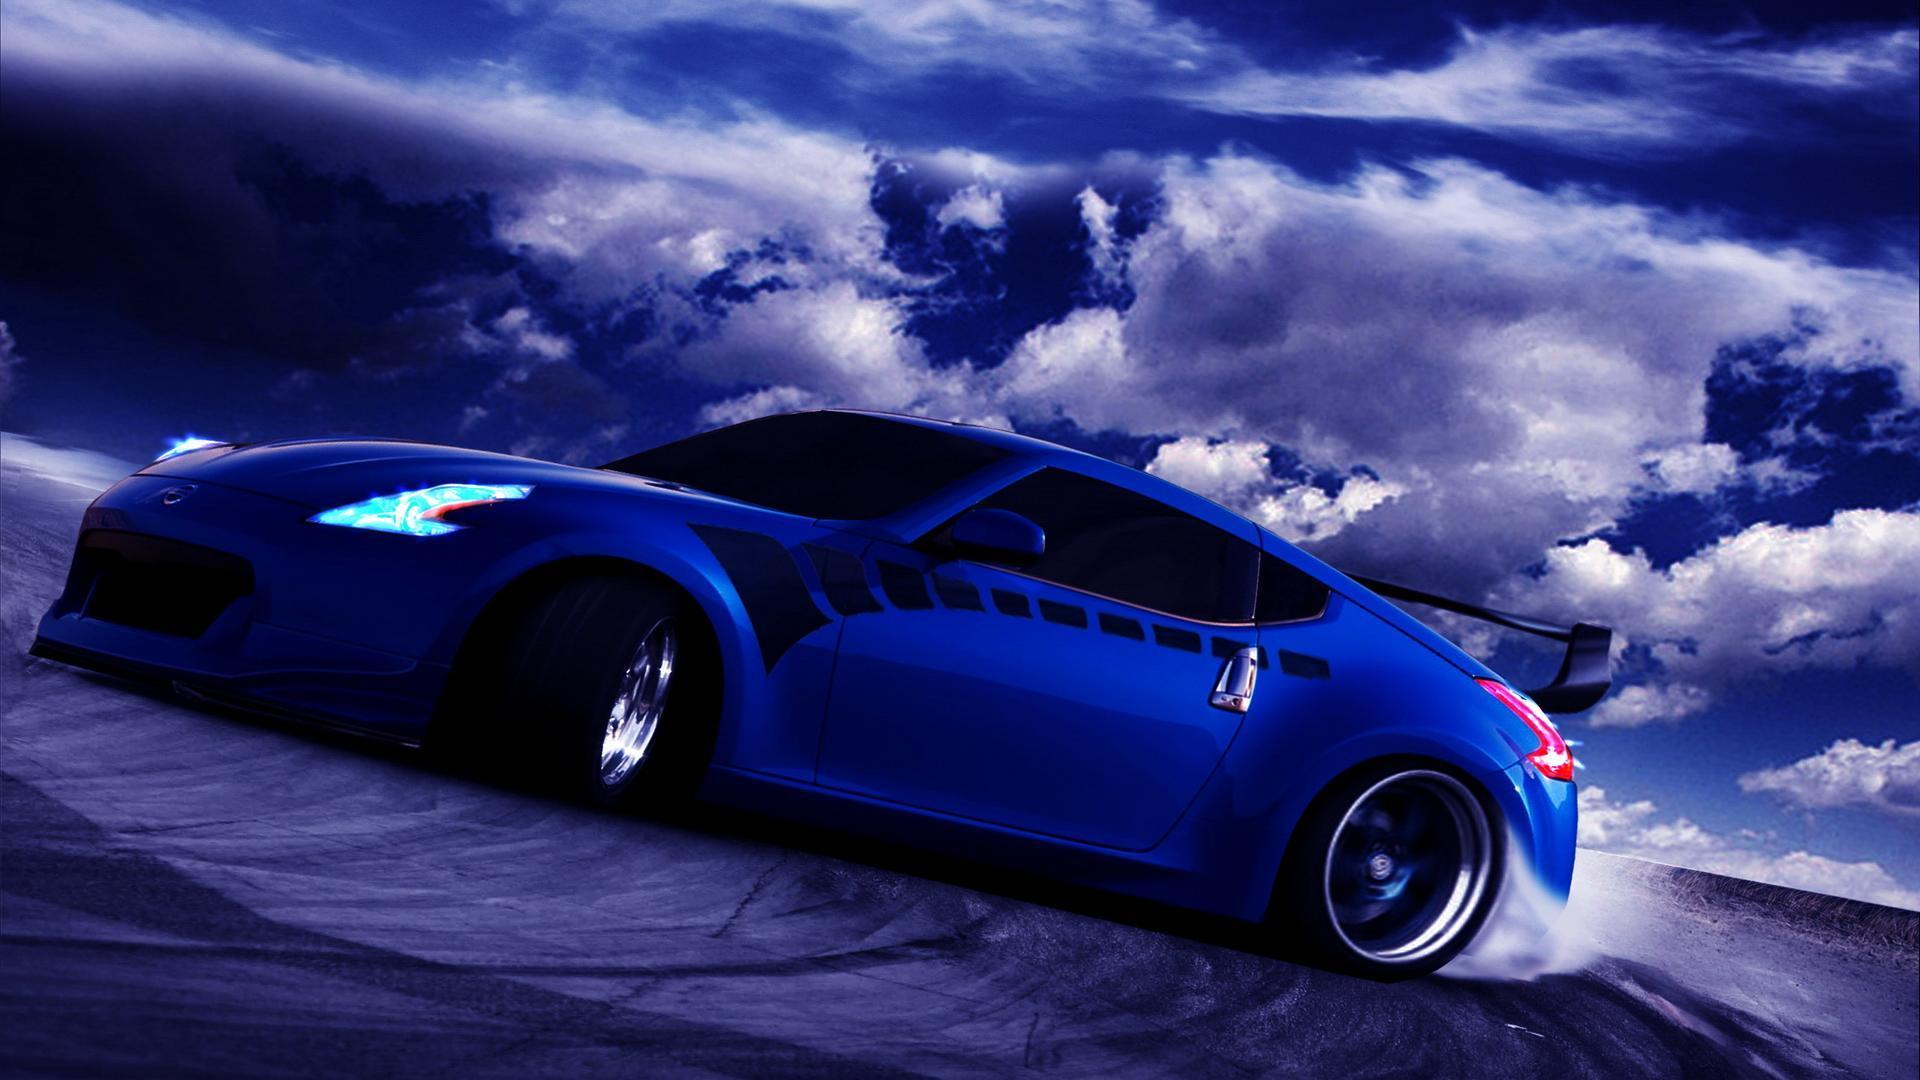 Blue Cool Car Wallpapers - Top Free Blue Cool Car Backgrounds